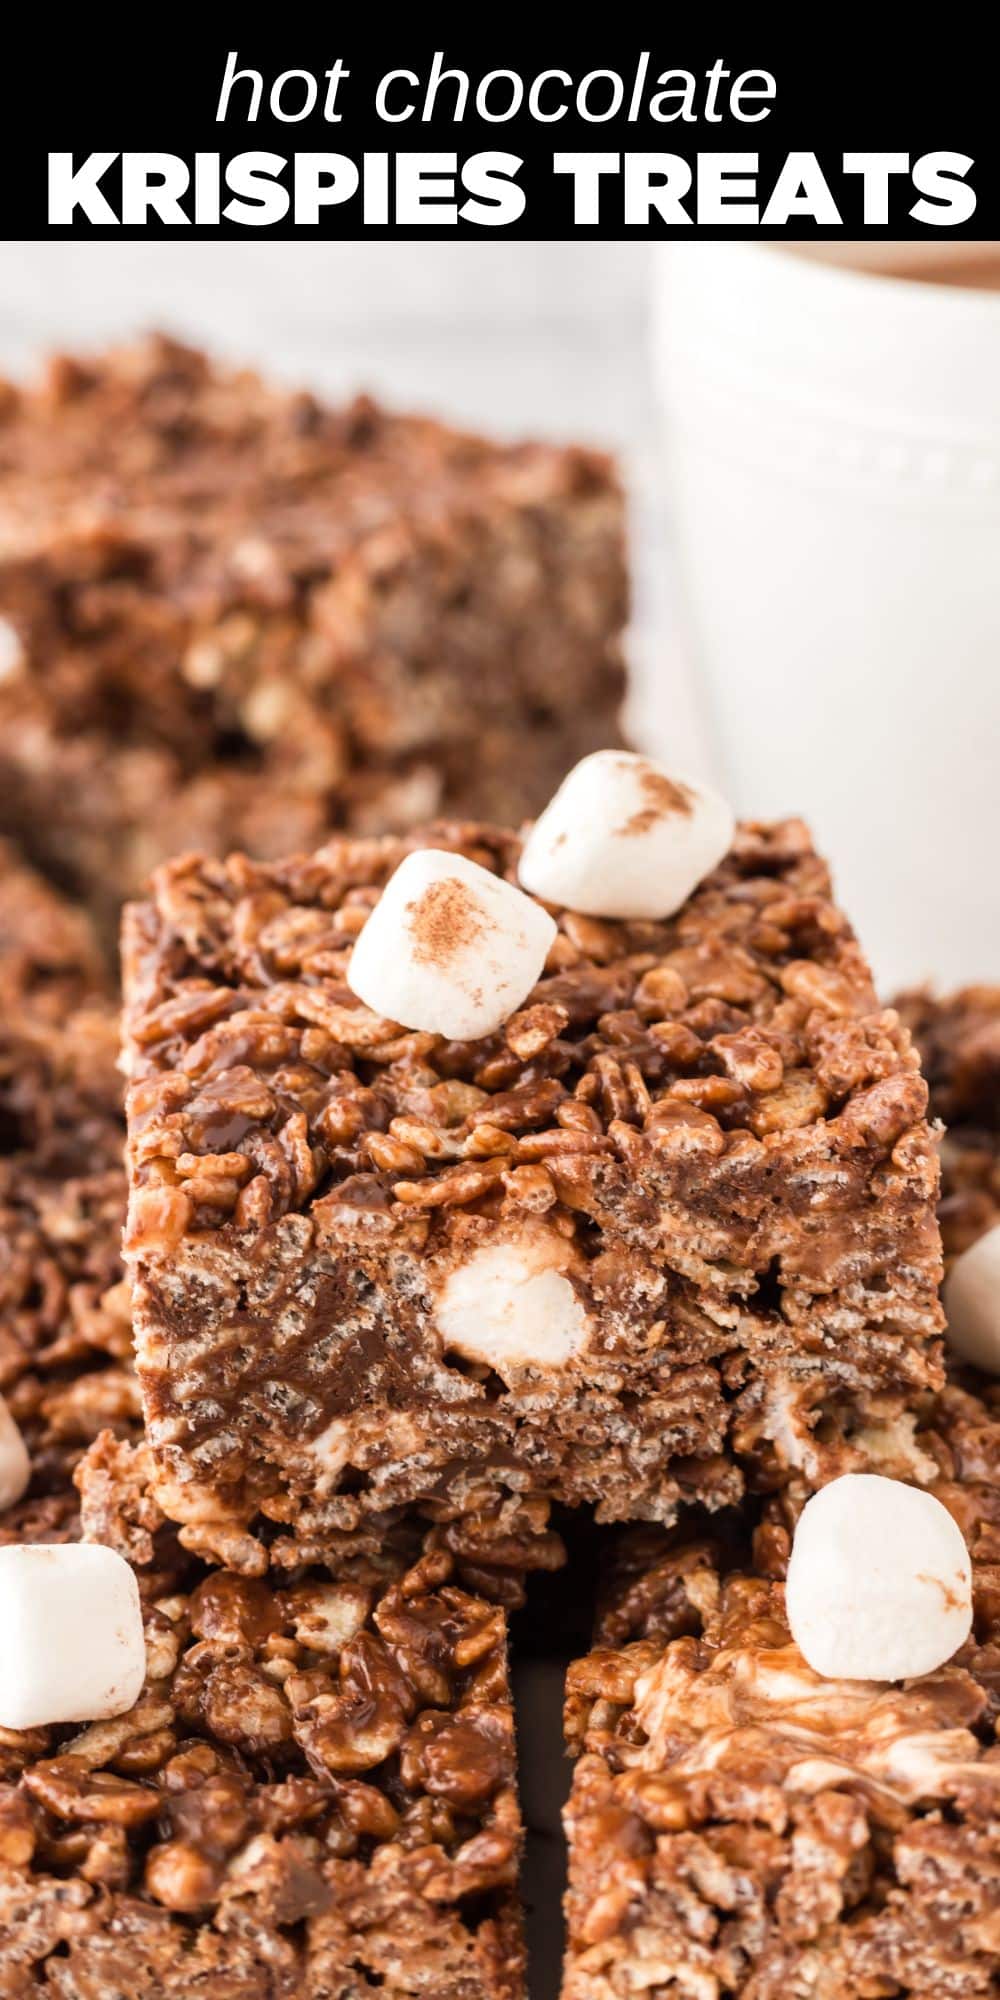 This hot chocolate Rice Krispie treats recipe combines the delicious flavor of warm and comforting hot cocoa with the gooey marshmallow goodness of a Rice Krispies Treat.